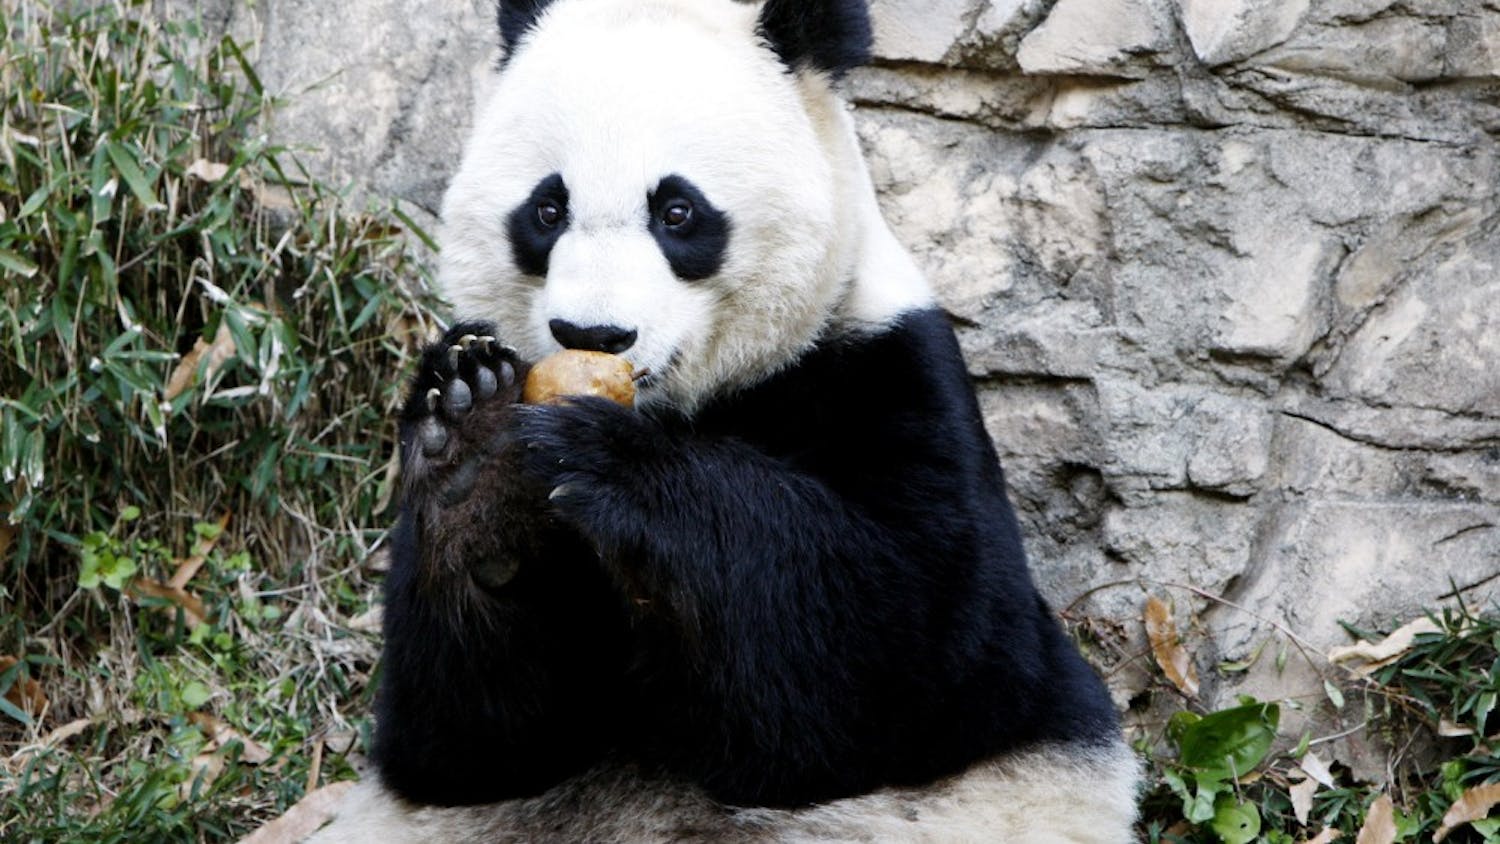 Mei Xiang, a female giant panda at the Smithsonian's National Zoo, pictured in this December 19, 2011 file photograph, gave birth to her second cub with Tian Tian as the result of artificial insemination. (Fang Zhe/Xinhua/Zuma Press/MCT)